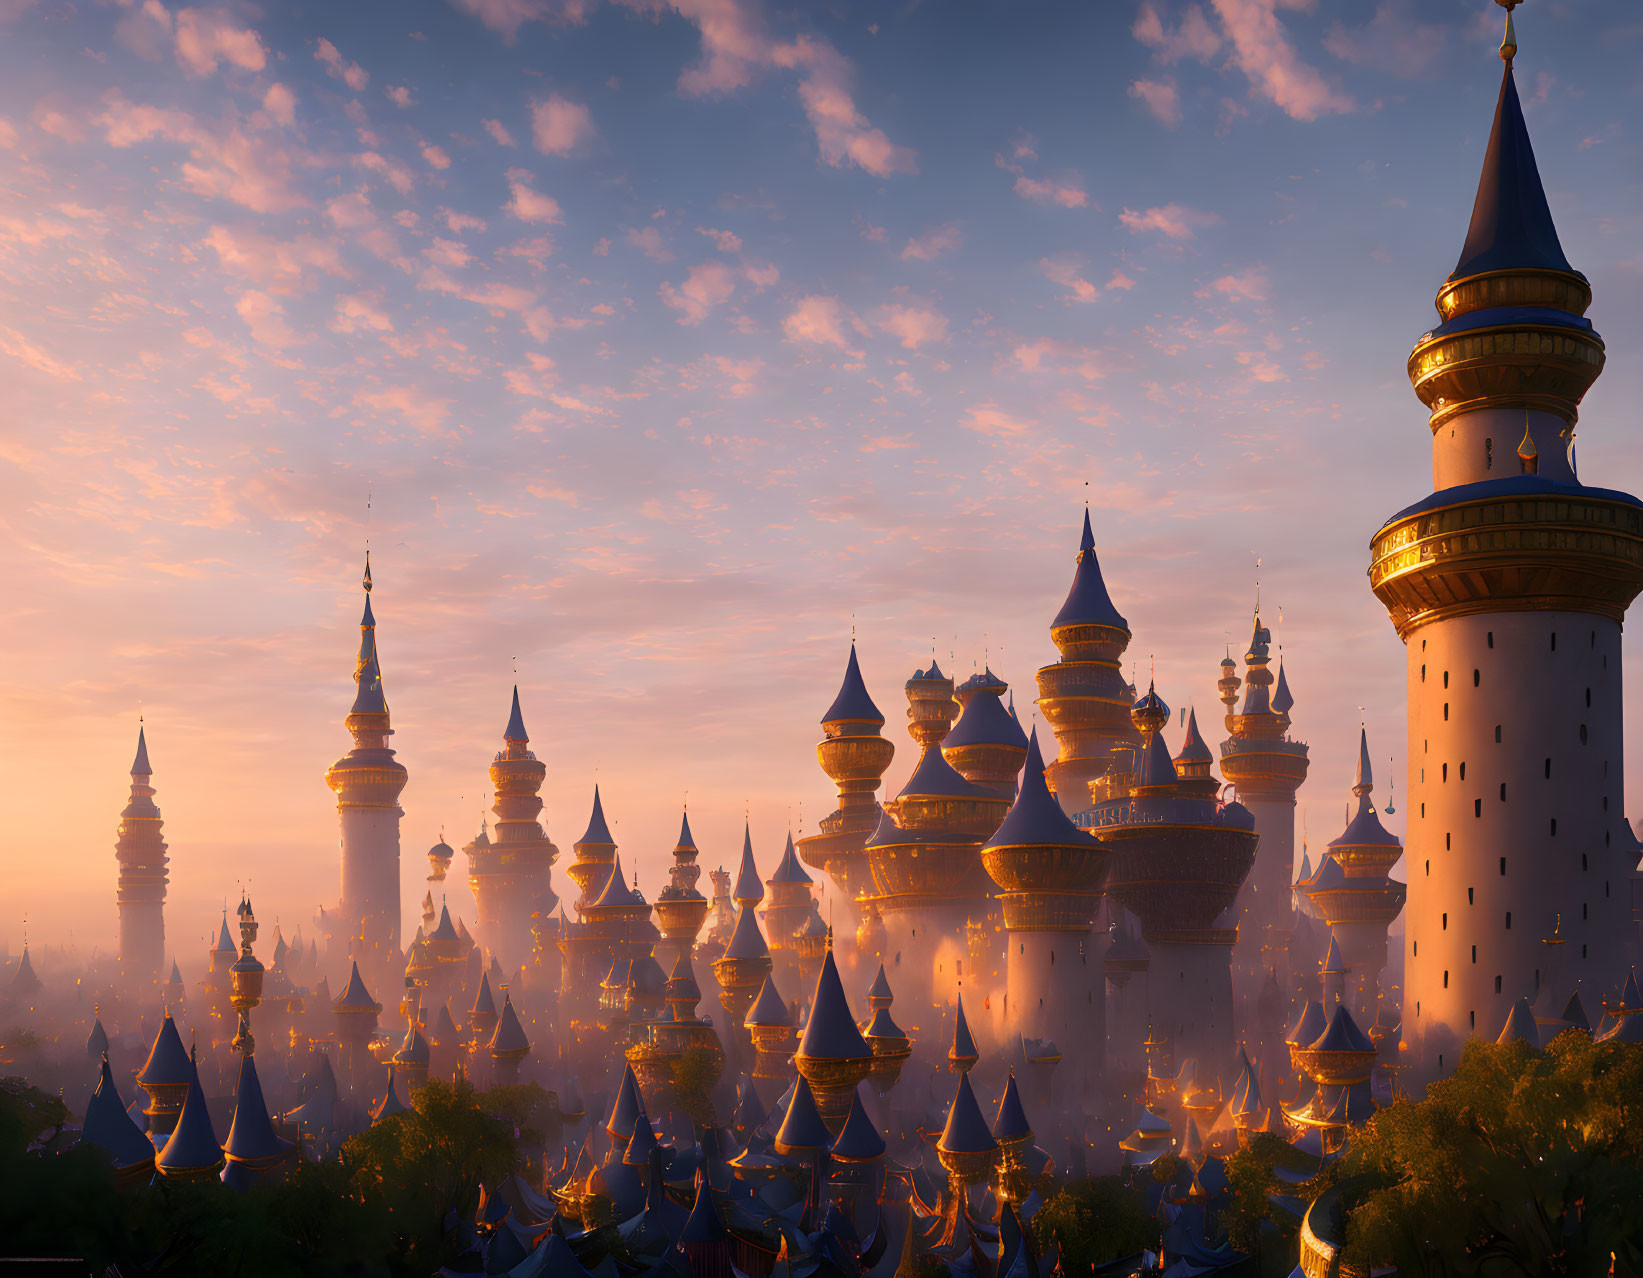 Fantasy landscape with magical spires and towers in warm sunrise light